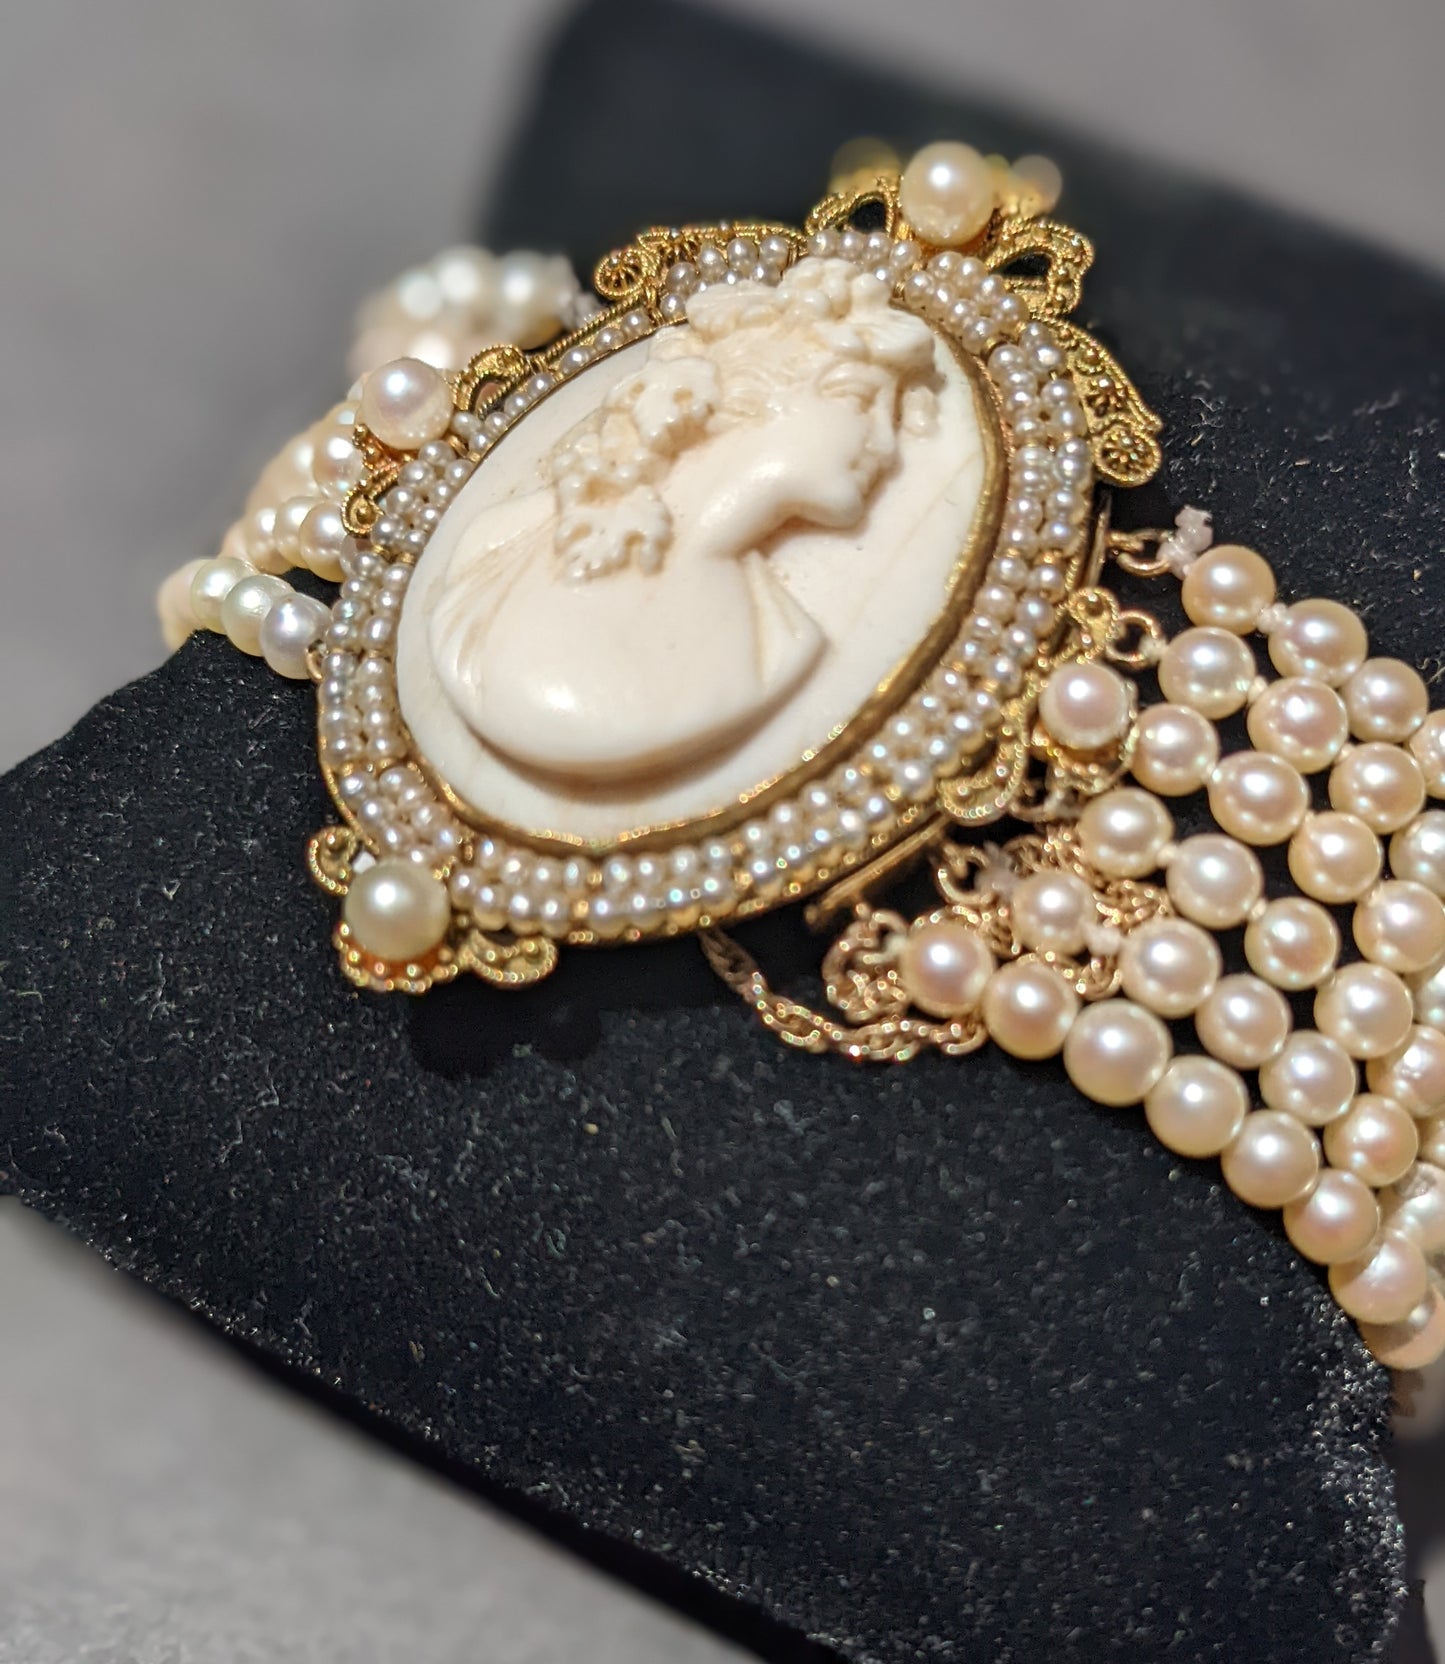 14kt Shell cameo and pearl bracelet